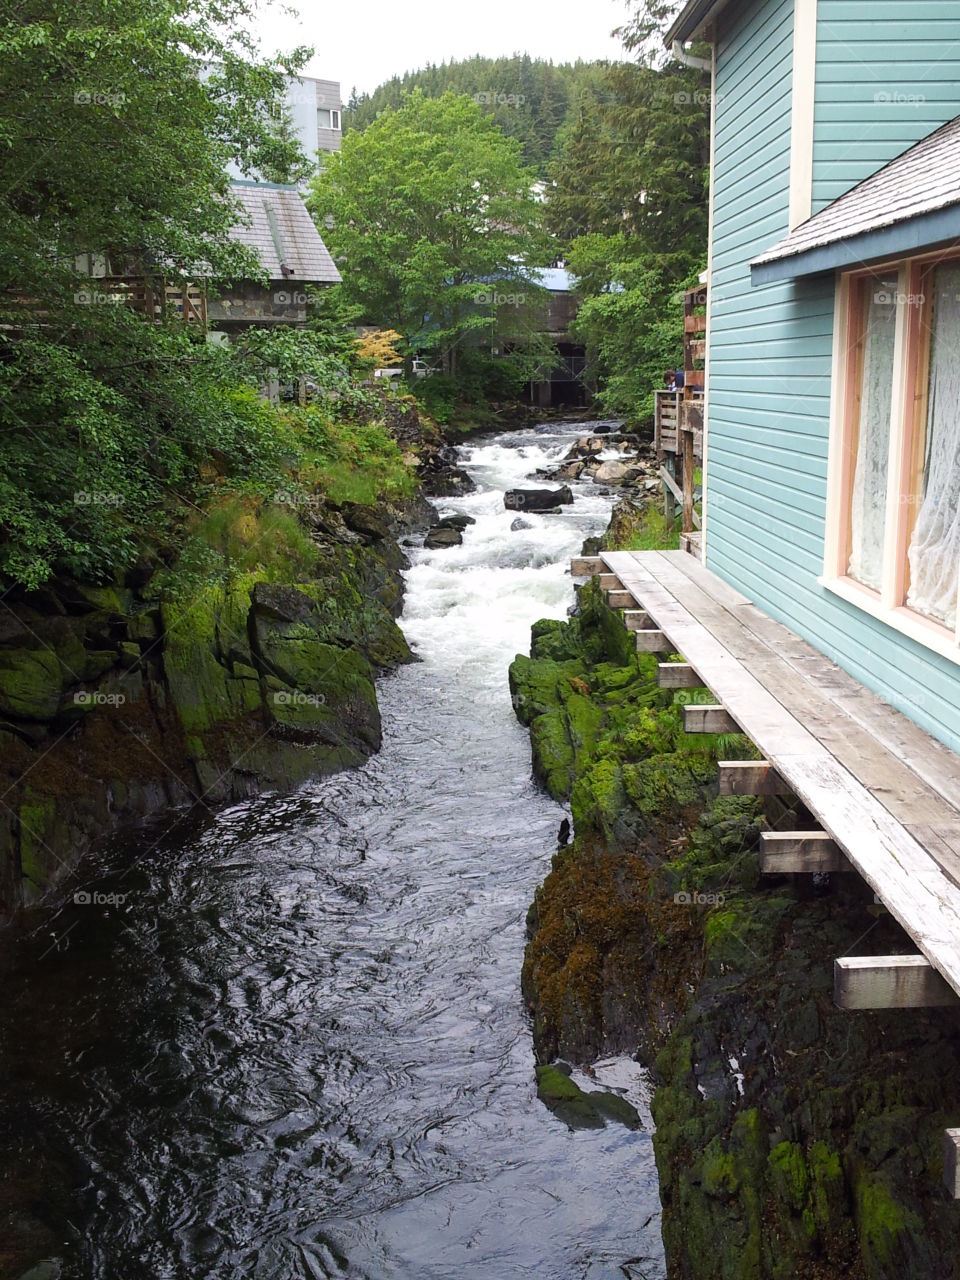 Ketchikan is named after Ketchikan Creek, which flows through the town, emptying into the Tongass Narrows a short distance southeast of its downtown. 
Ketchikan - Alaska